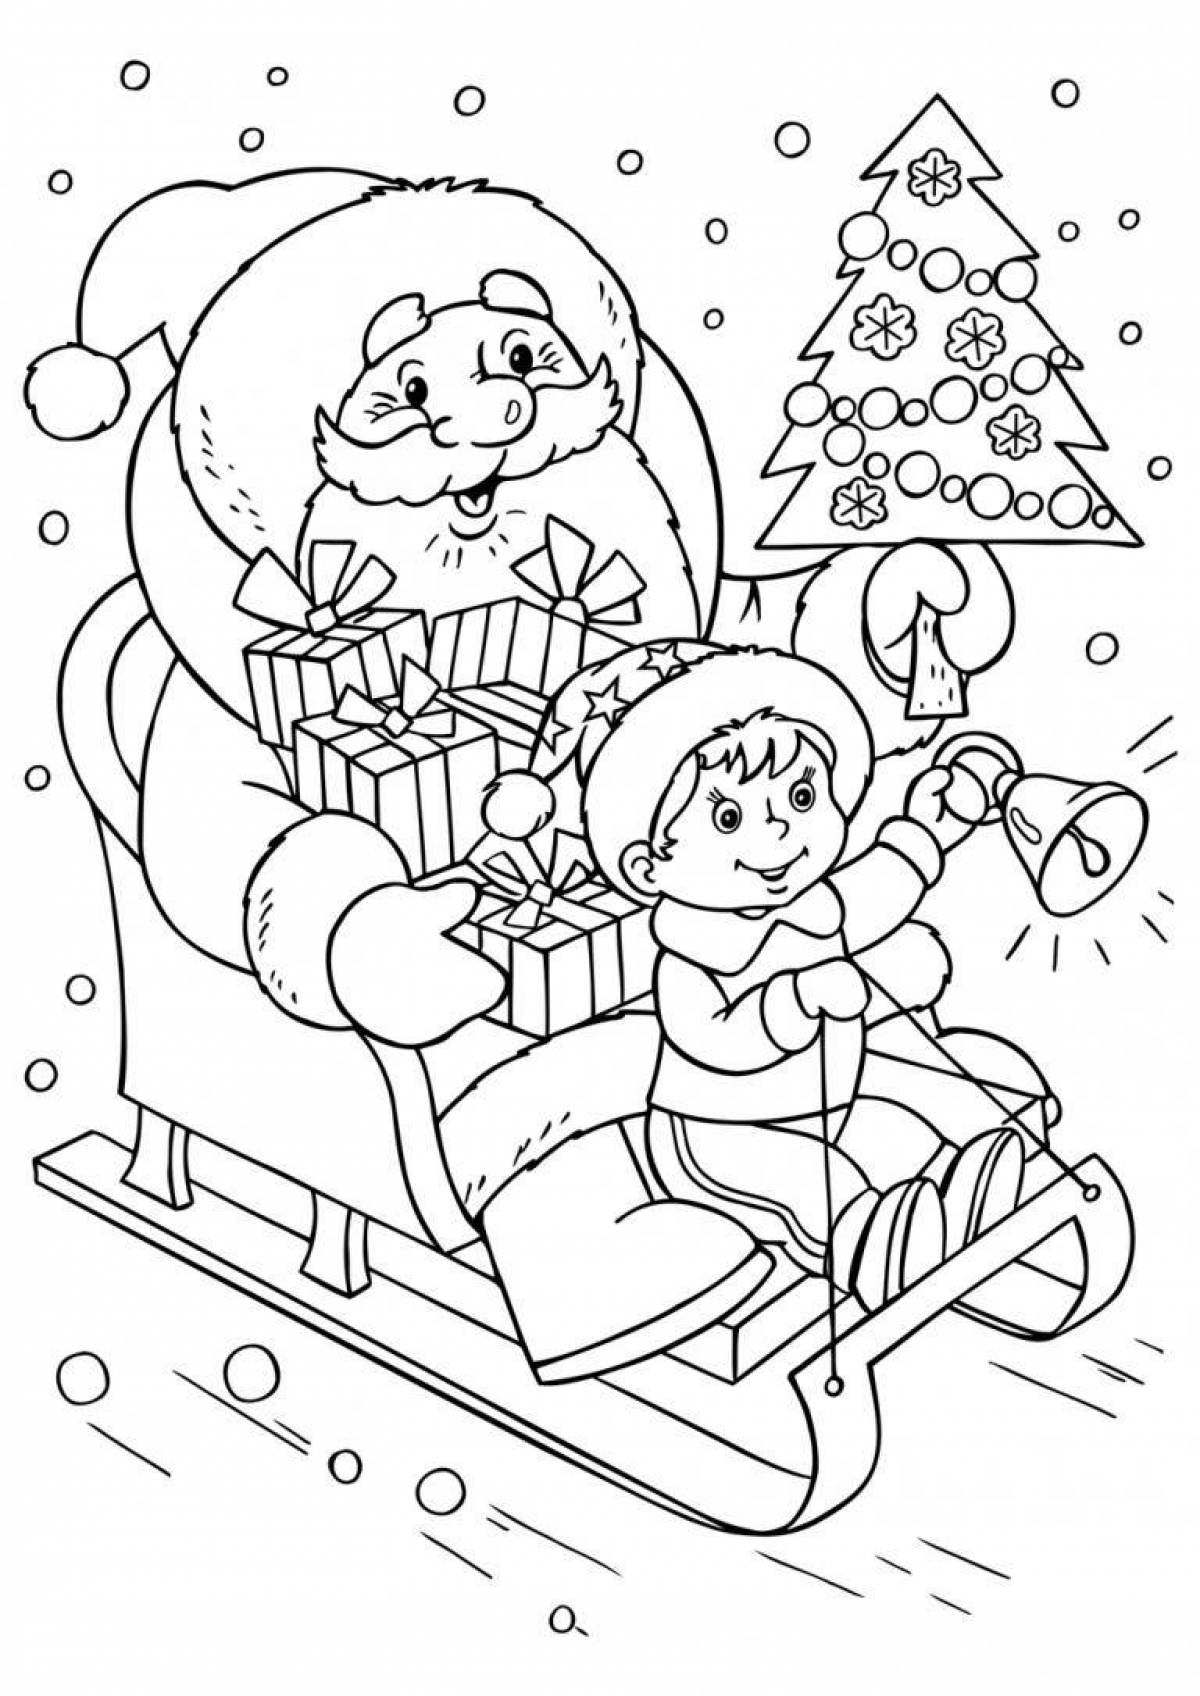 Colorful Christmas coloring book for children 6-7 years old